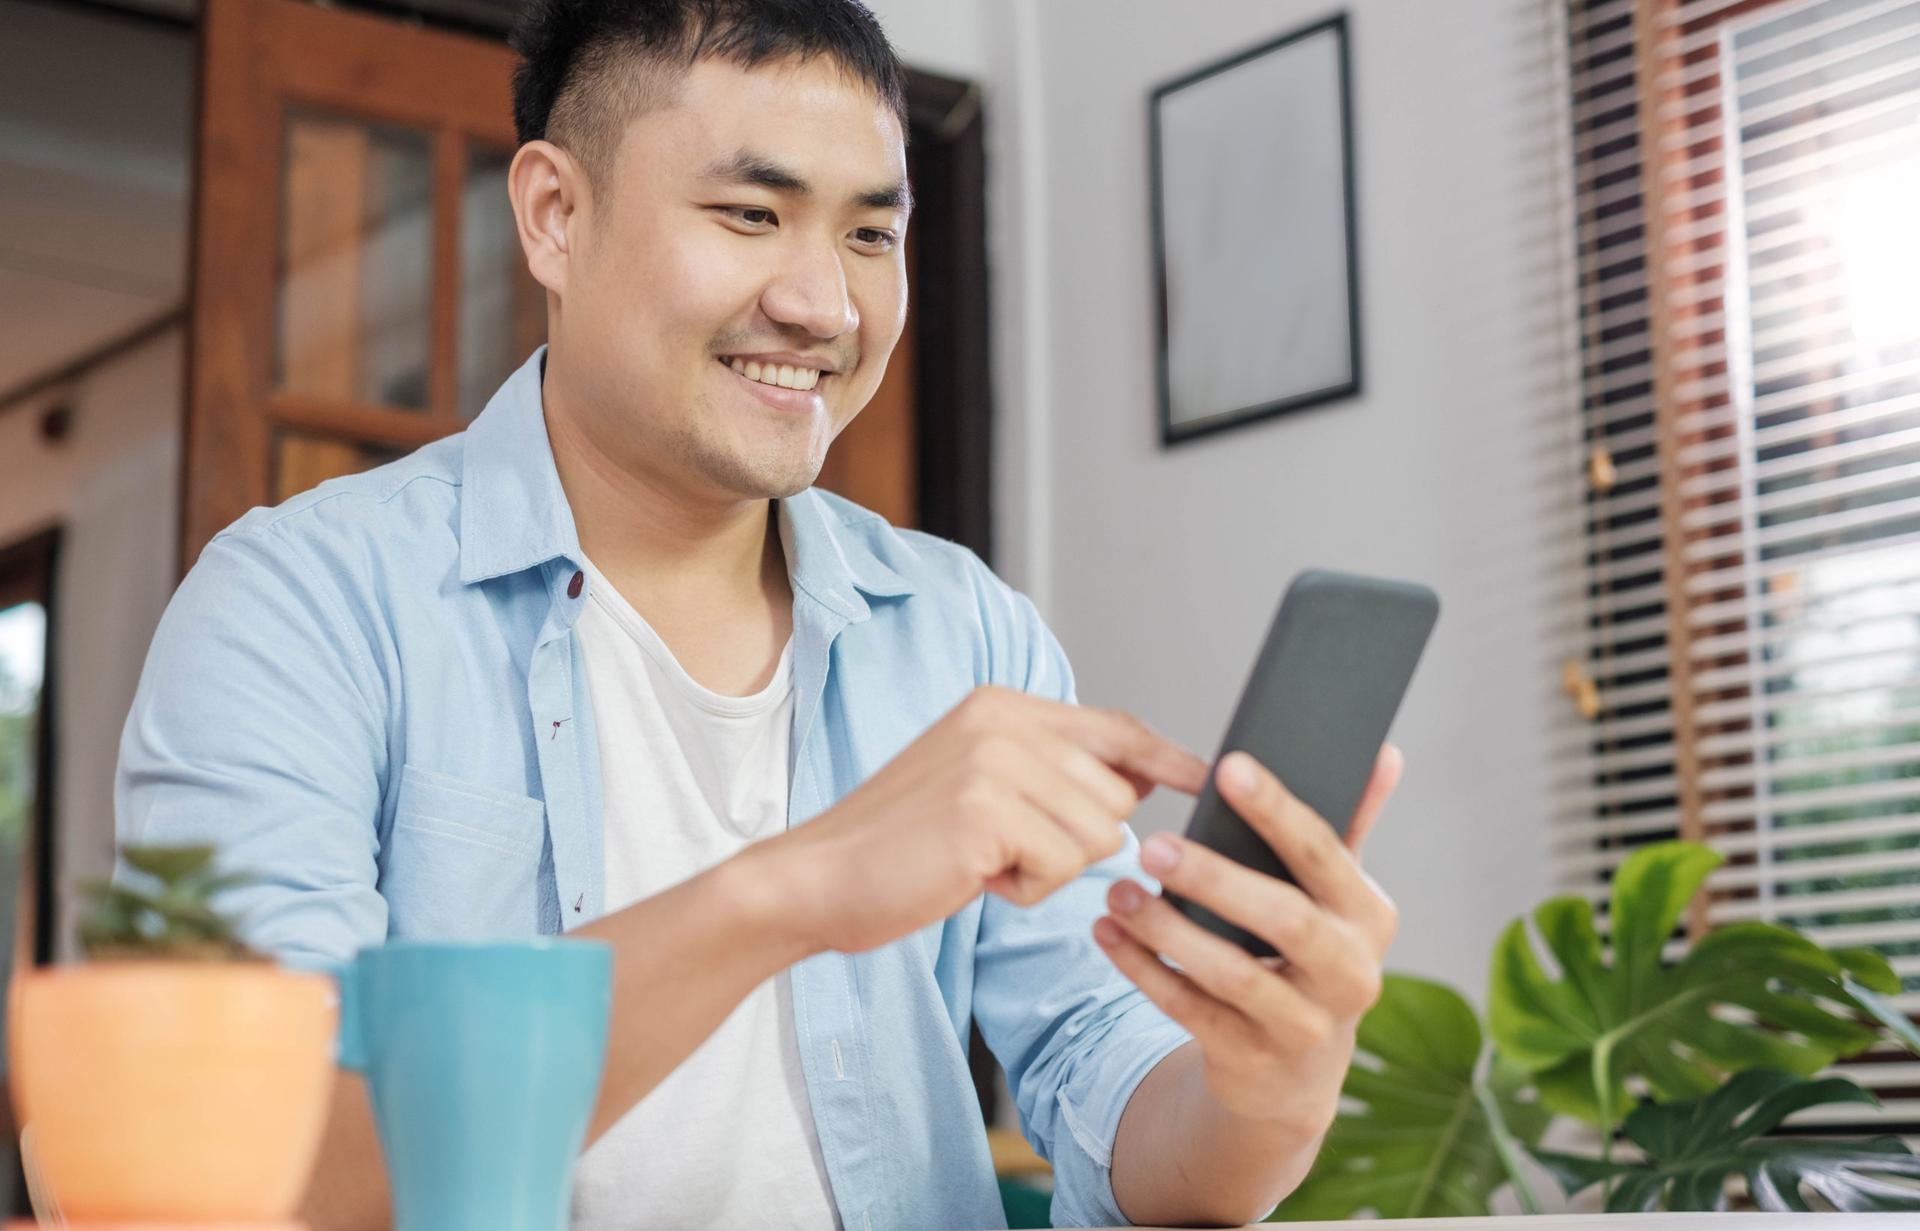 Up to date with evolving customer expectations: Customer smiles while using phone